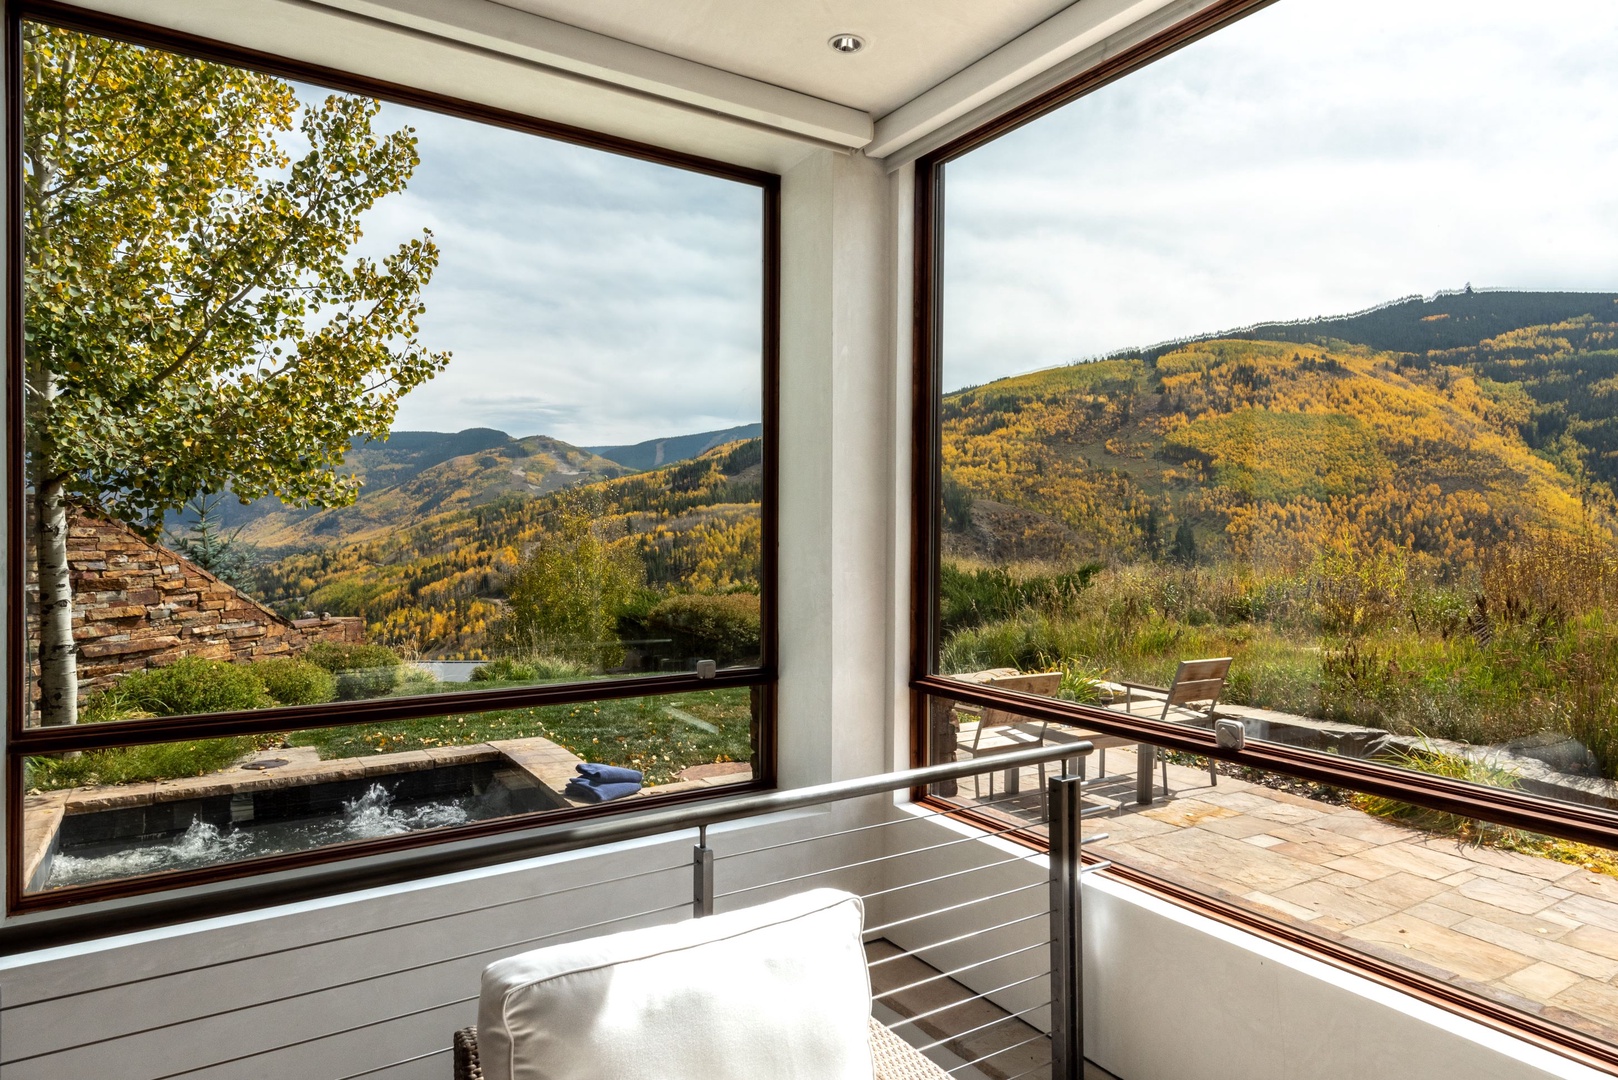 Lounge in the sunshine or soak in the hot tub on the upper-level patio